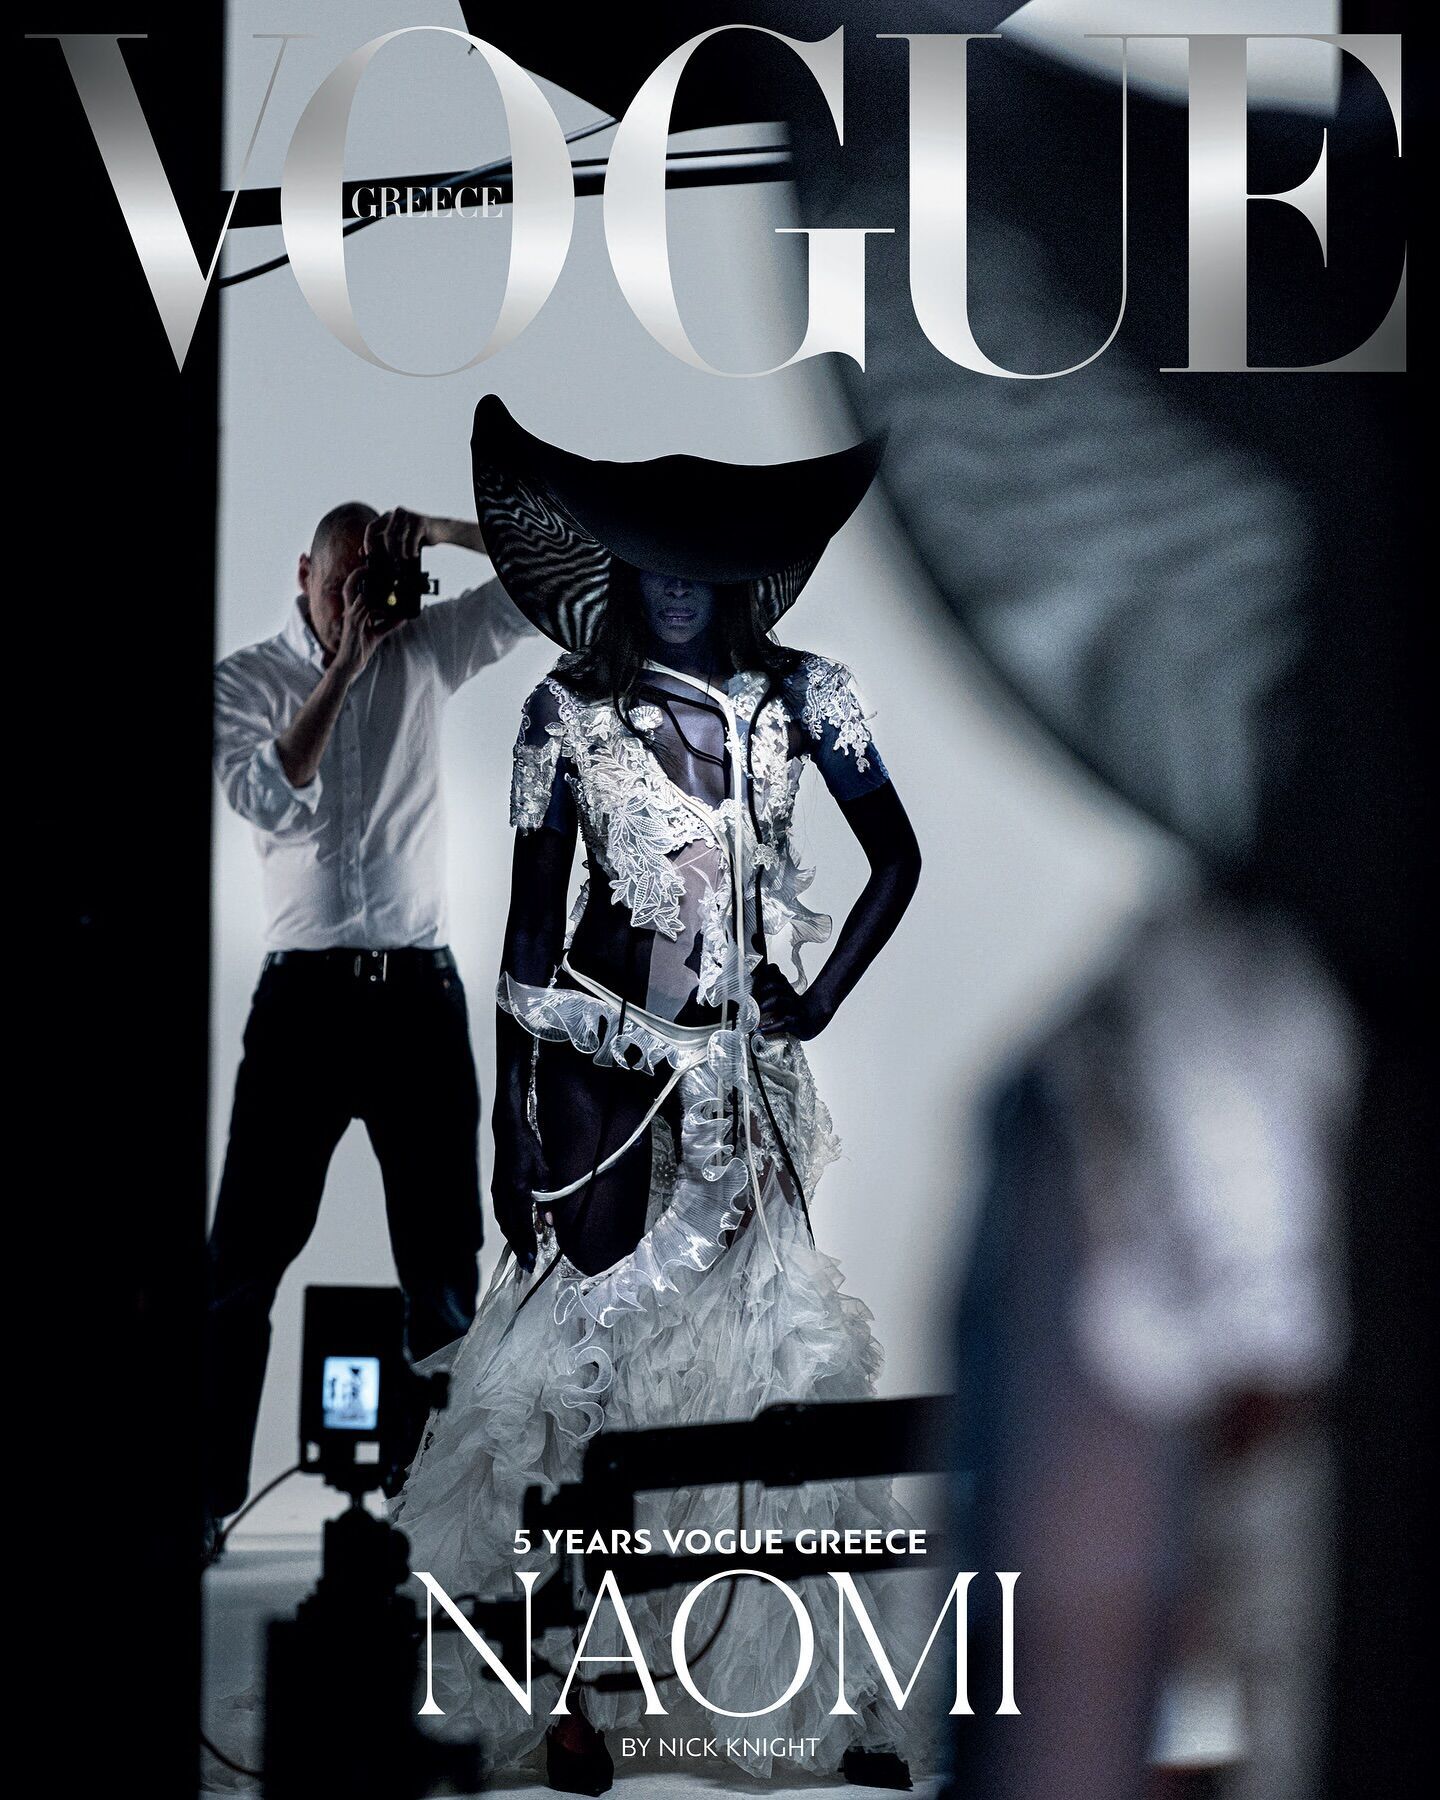 53-year-old Naomi Campbell starred for Vogue in revealing images. Photo